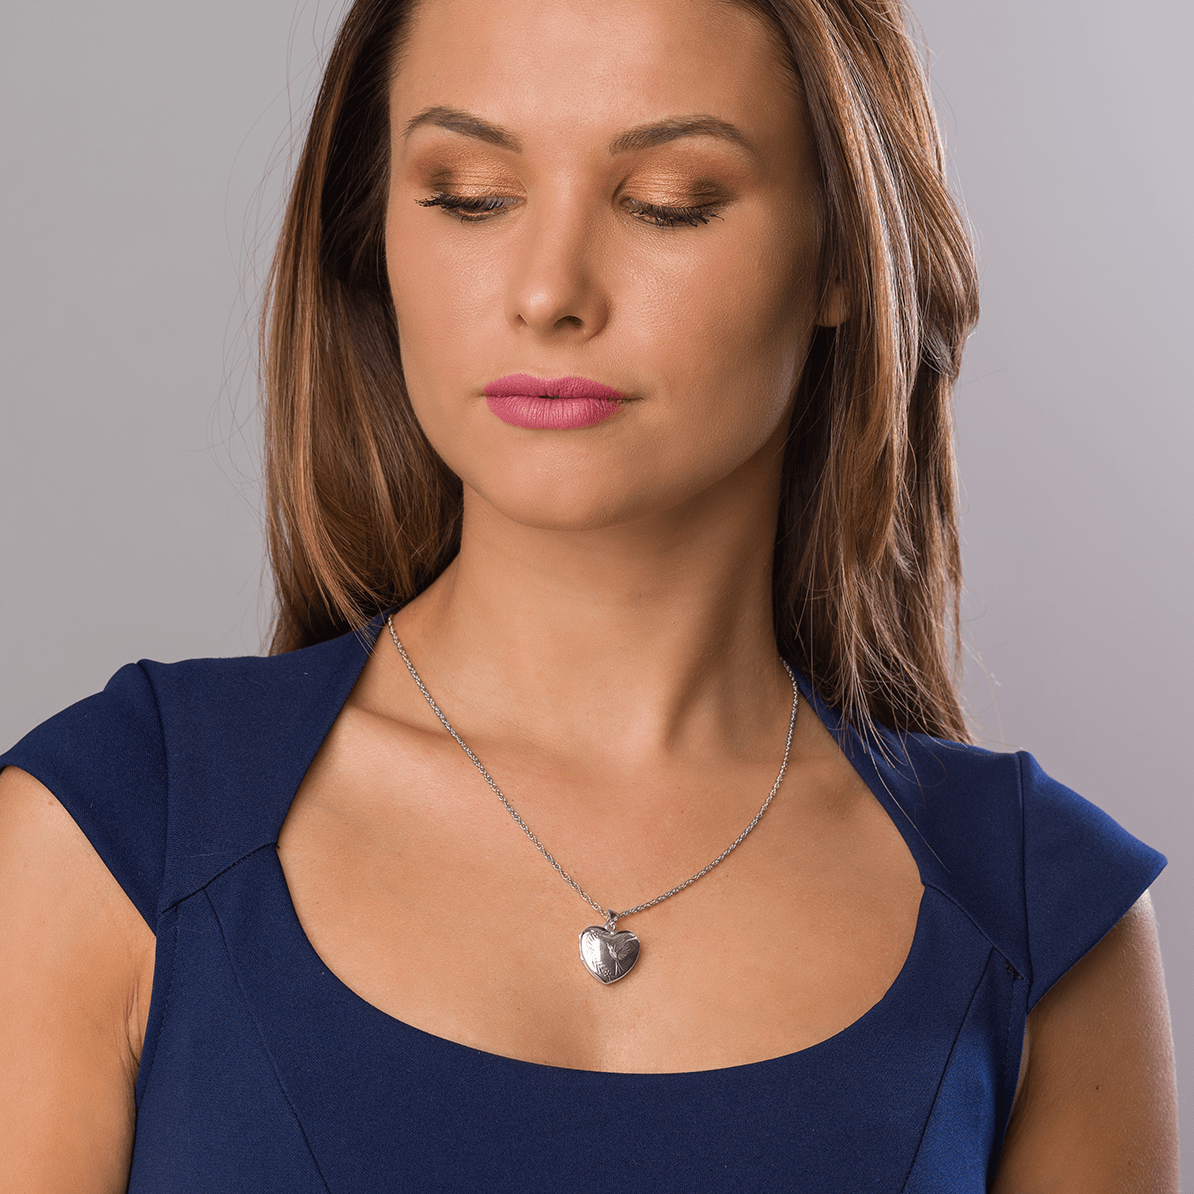 Model wearing a 9 ct white gold heart locket engraved with a bird design on a 9 ct white gold chain